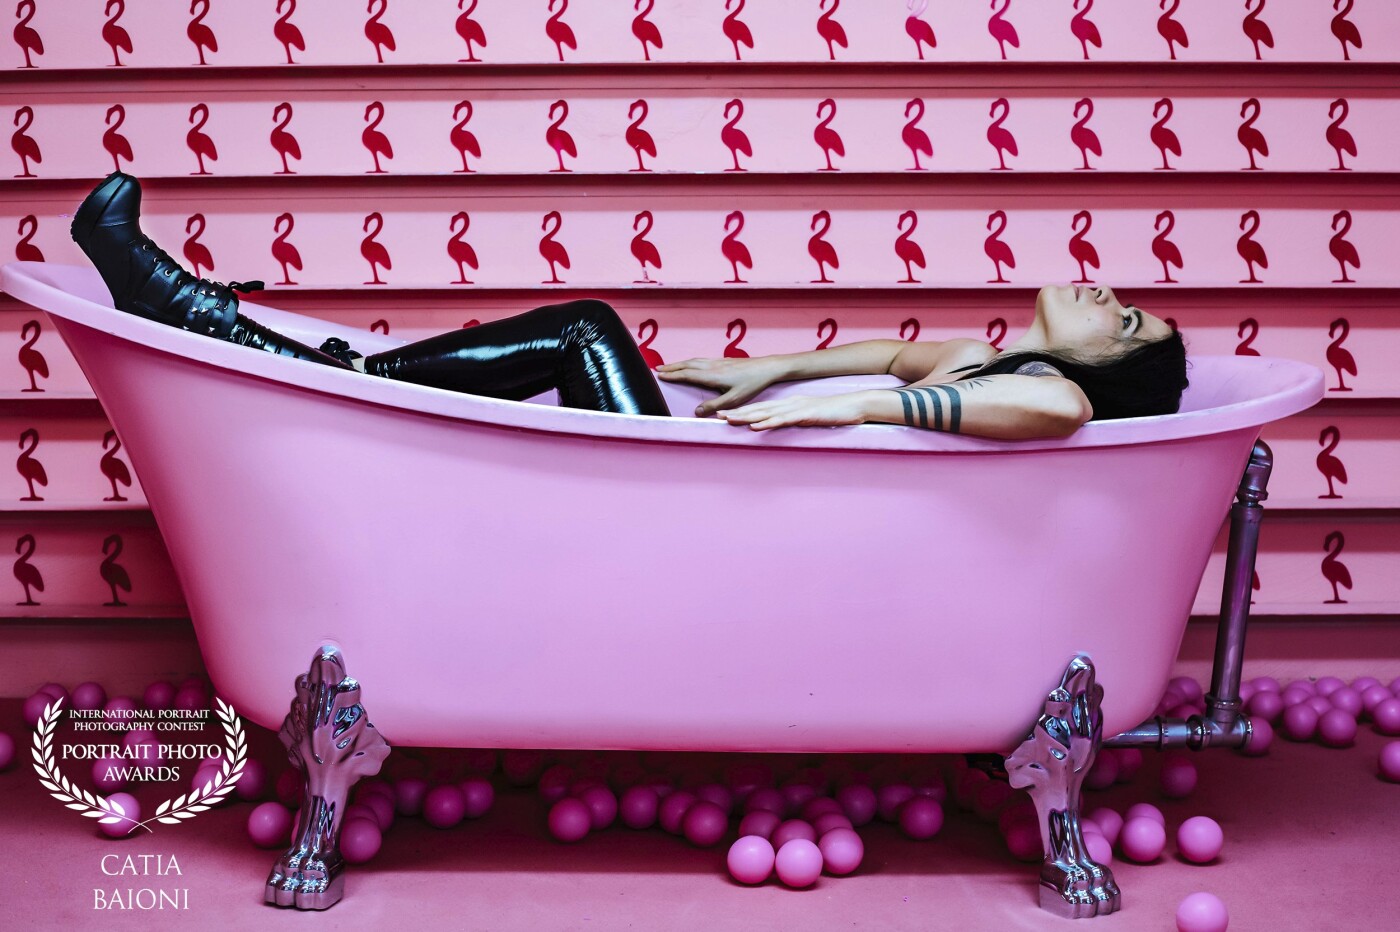 Black and Latex meets Pink and Sweet<br />
With Silvia von peacemakerart: https://www.instagram.com/peacemaker_art/?hl=de<br />
We drove in one day, to the Candy Popup Museum from Bern to Cologne to shoot.